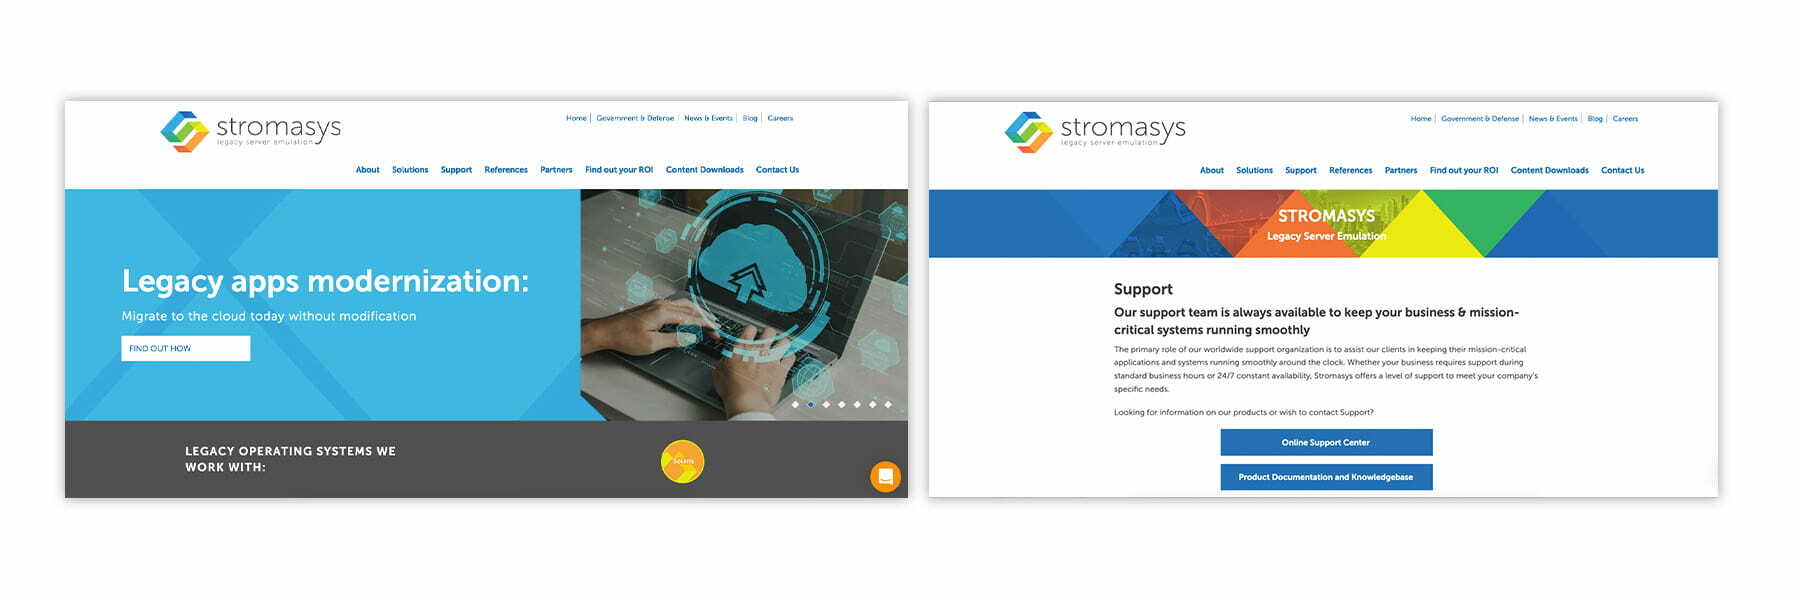 two side-by-side screenshots of stromasys website before redesign project